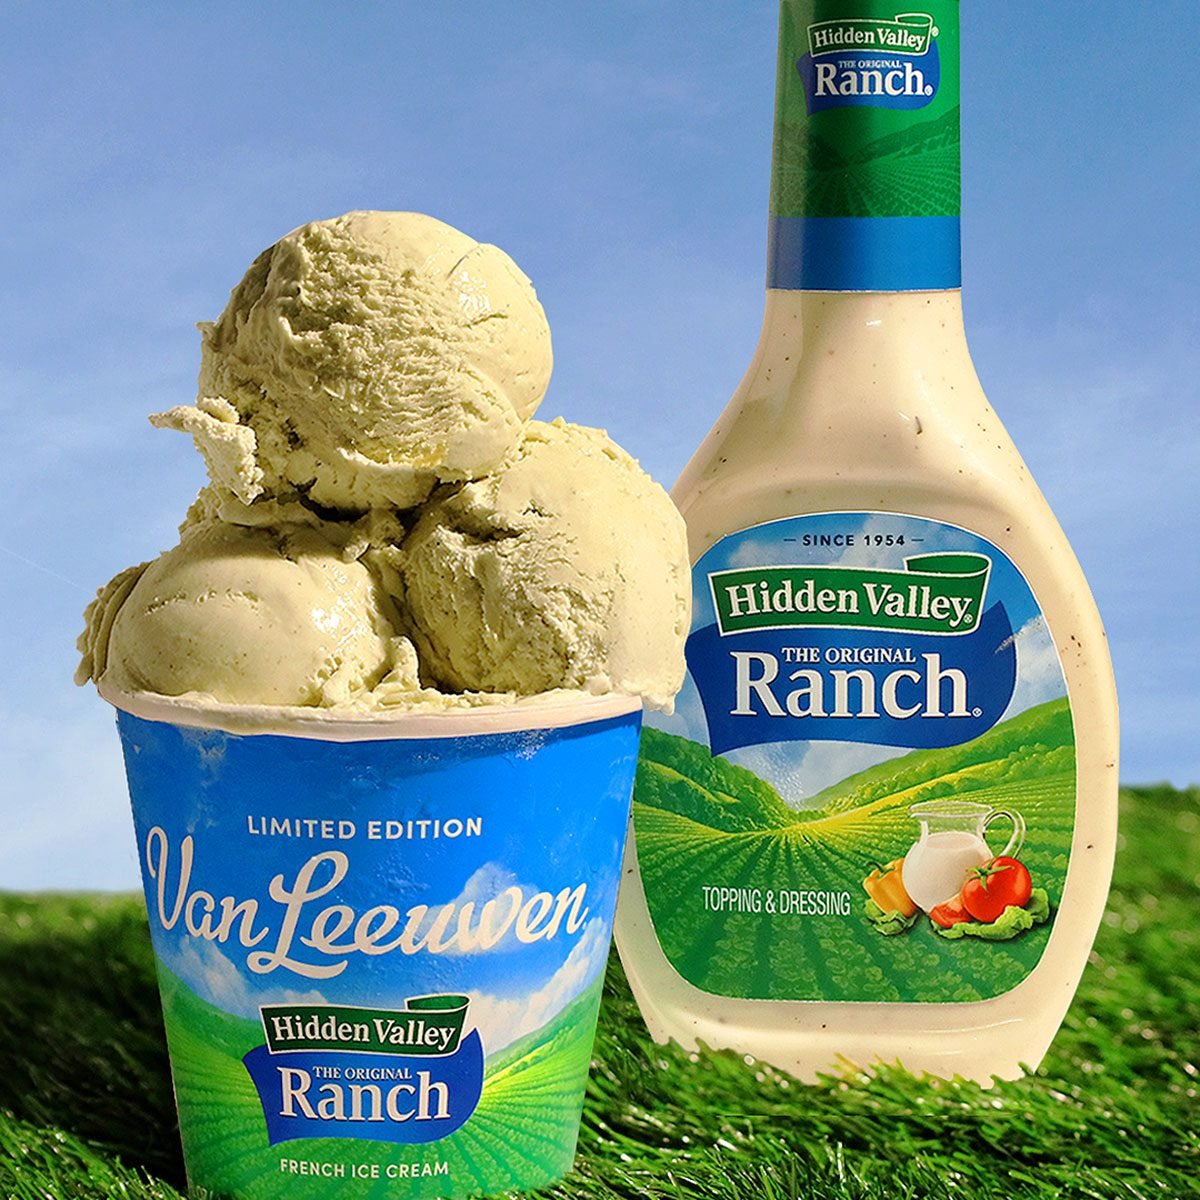 We Tried Ranch Ice Cream and It Tastes Just Like Frozen Dressing